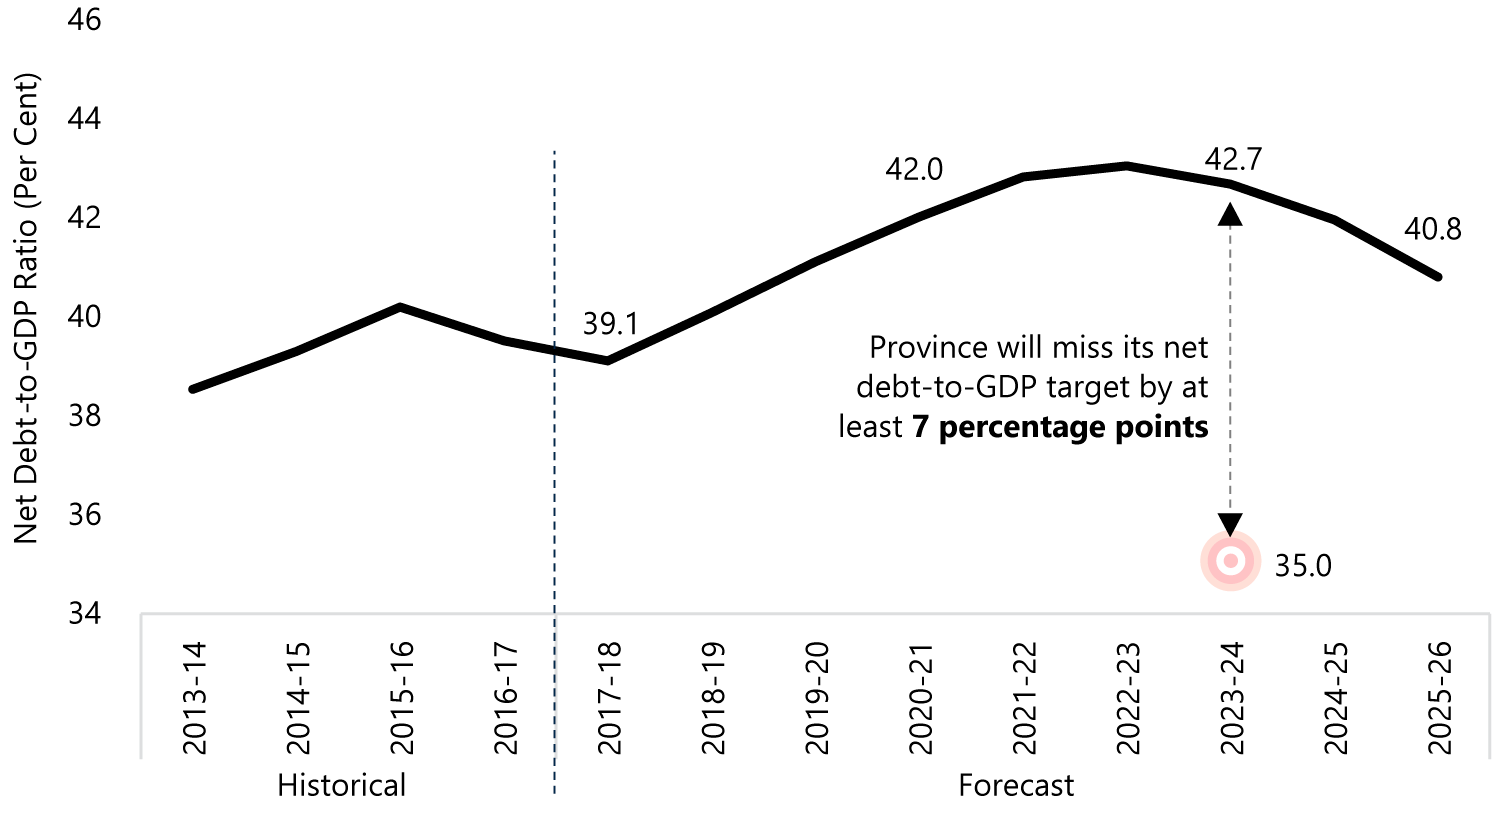 The Province Will Not Meet its 2023-24 Net Debt-to-GDP Target